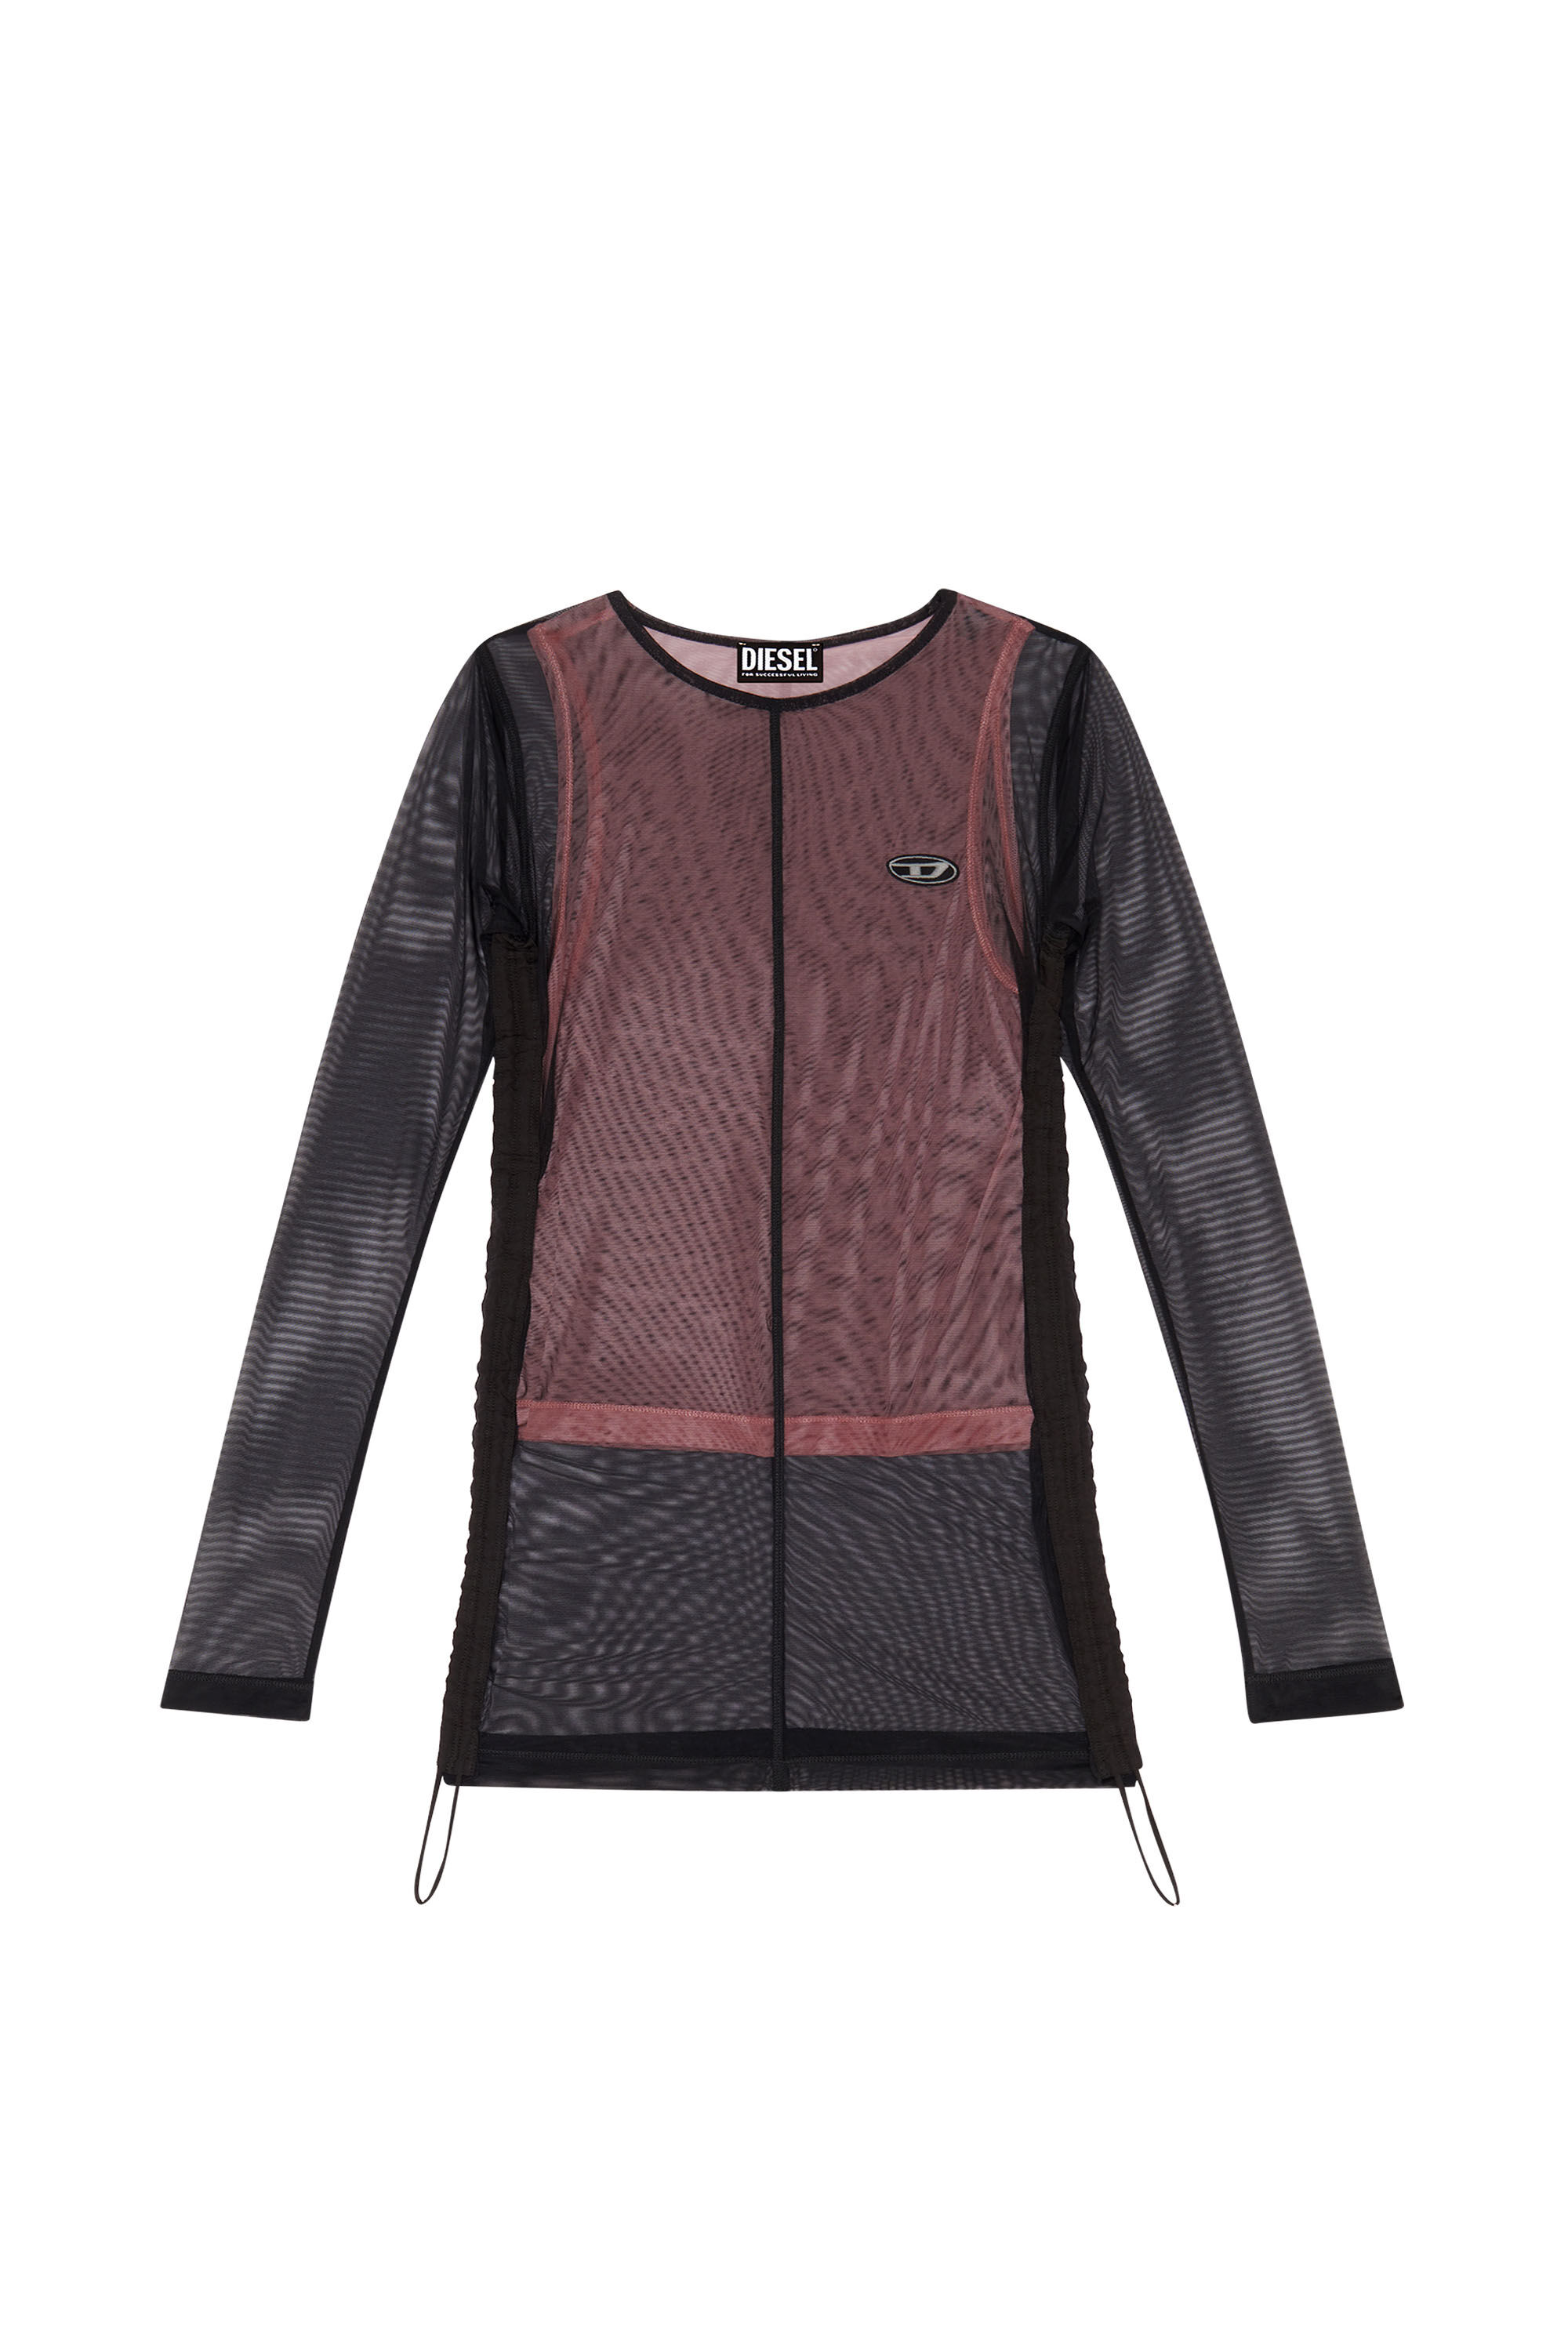 T-JURLY Woman: Double-layer mesh top | Diesel